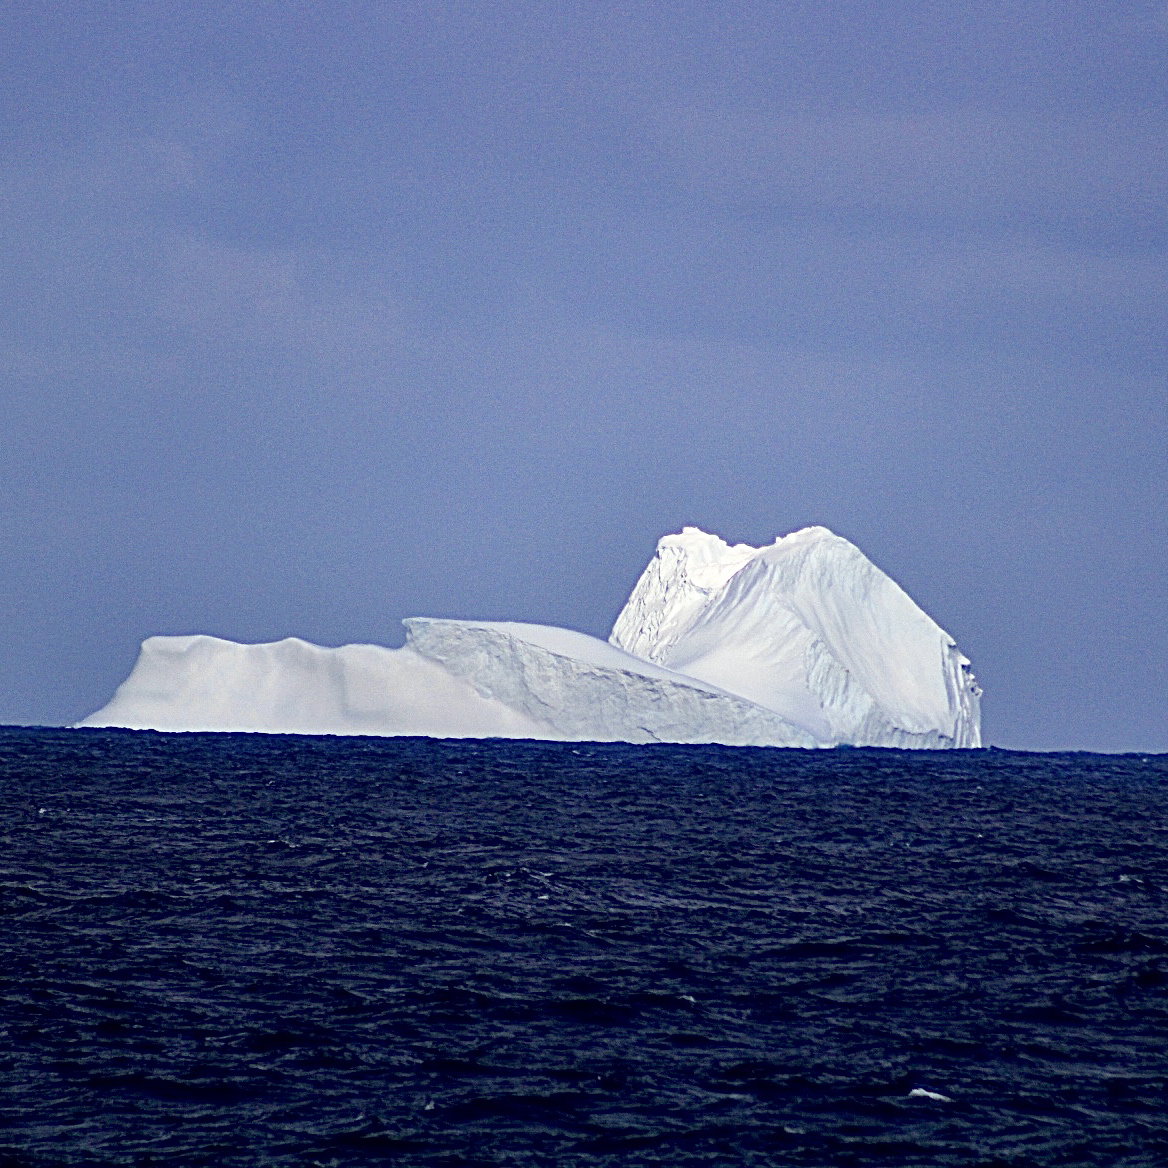 Large iceberg viewed off the starboard side of the ship during sampling. 